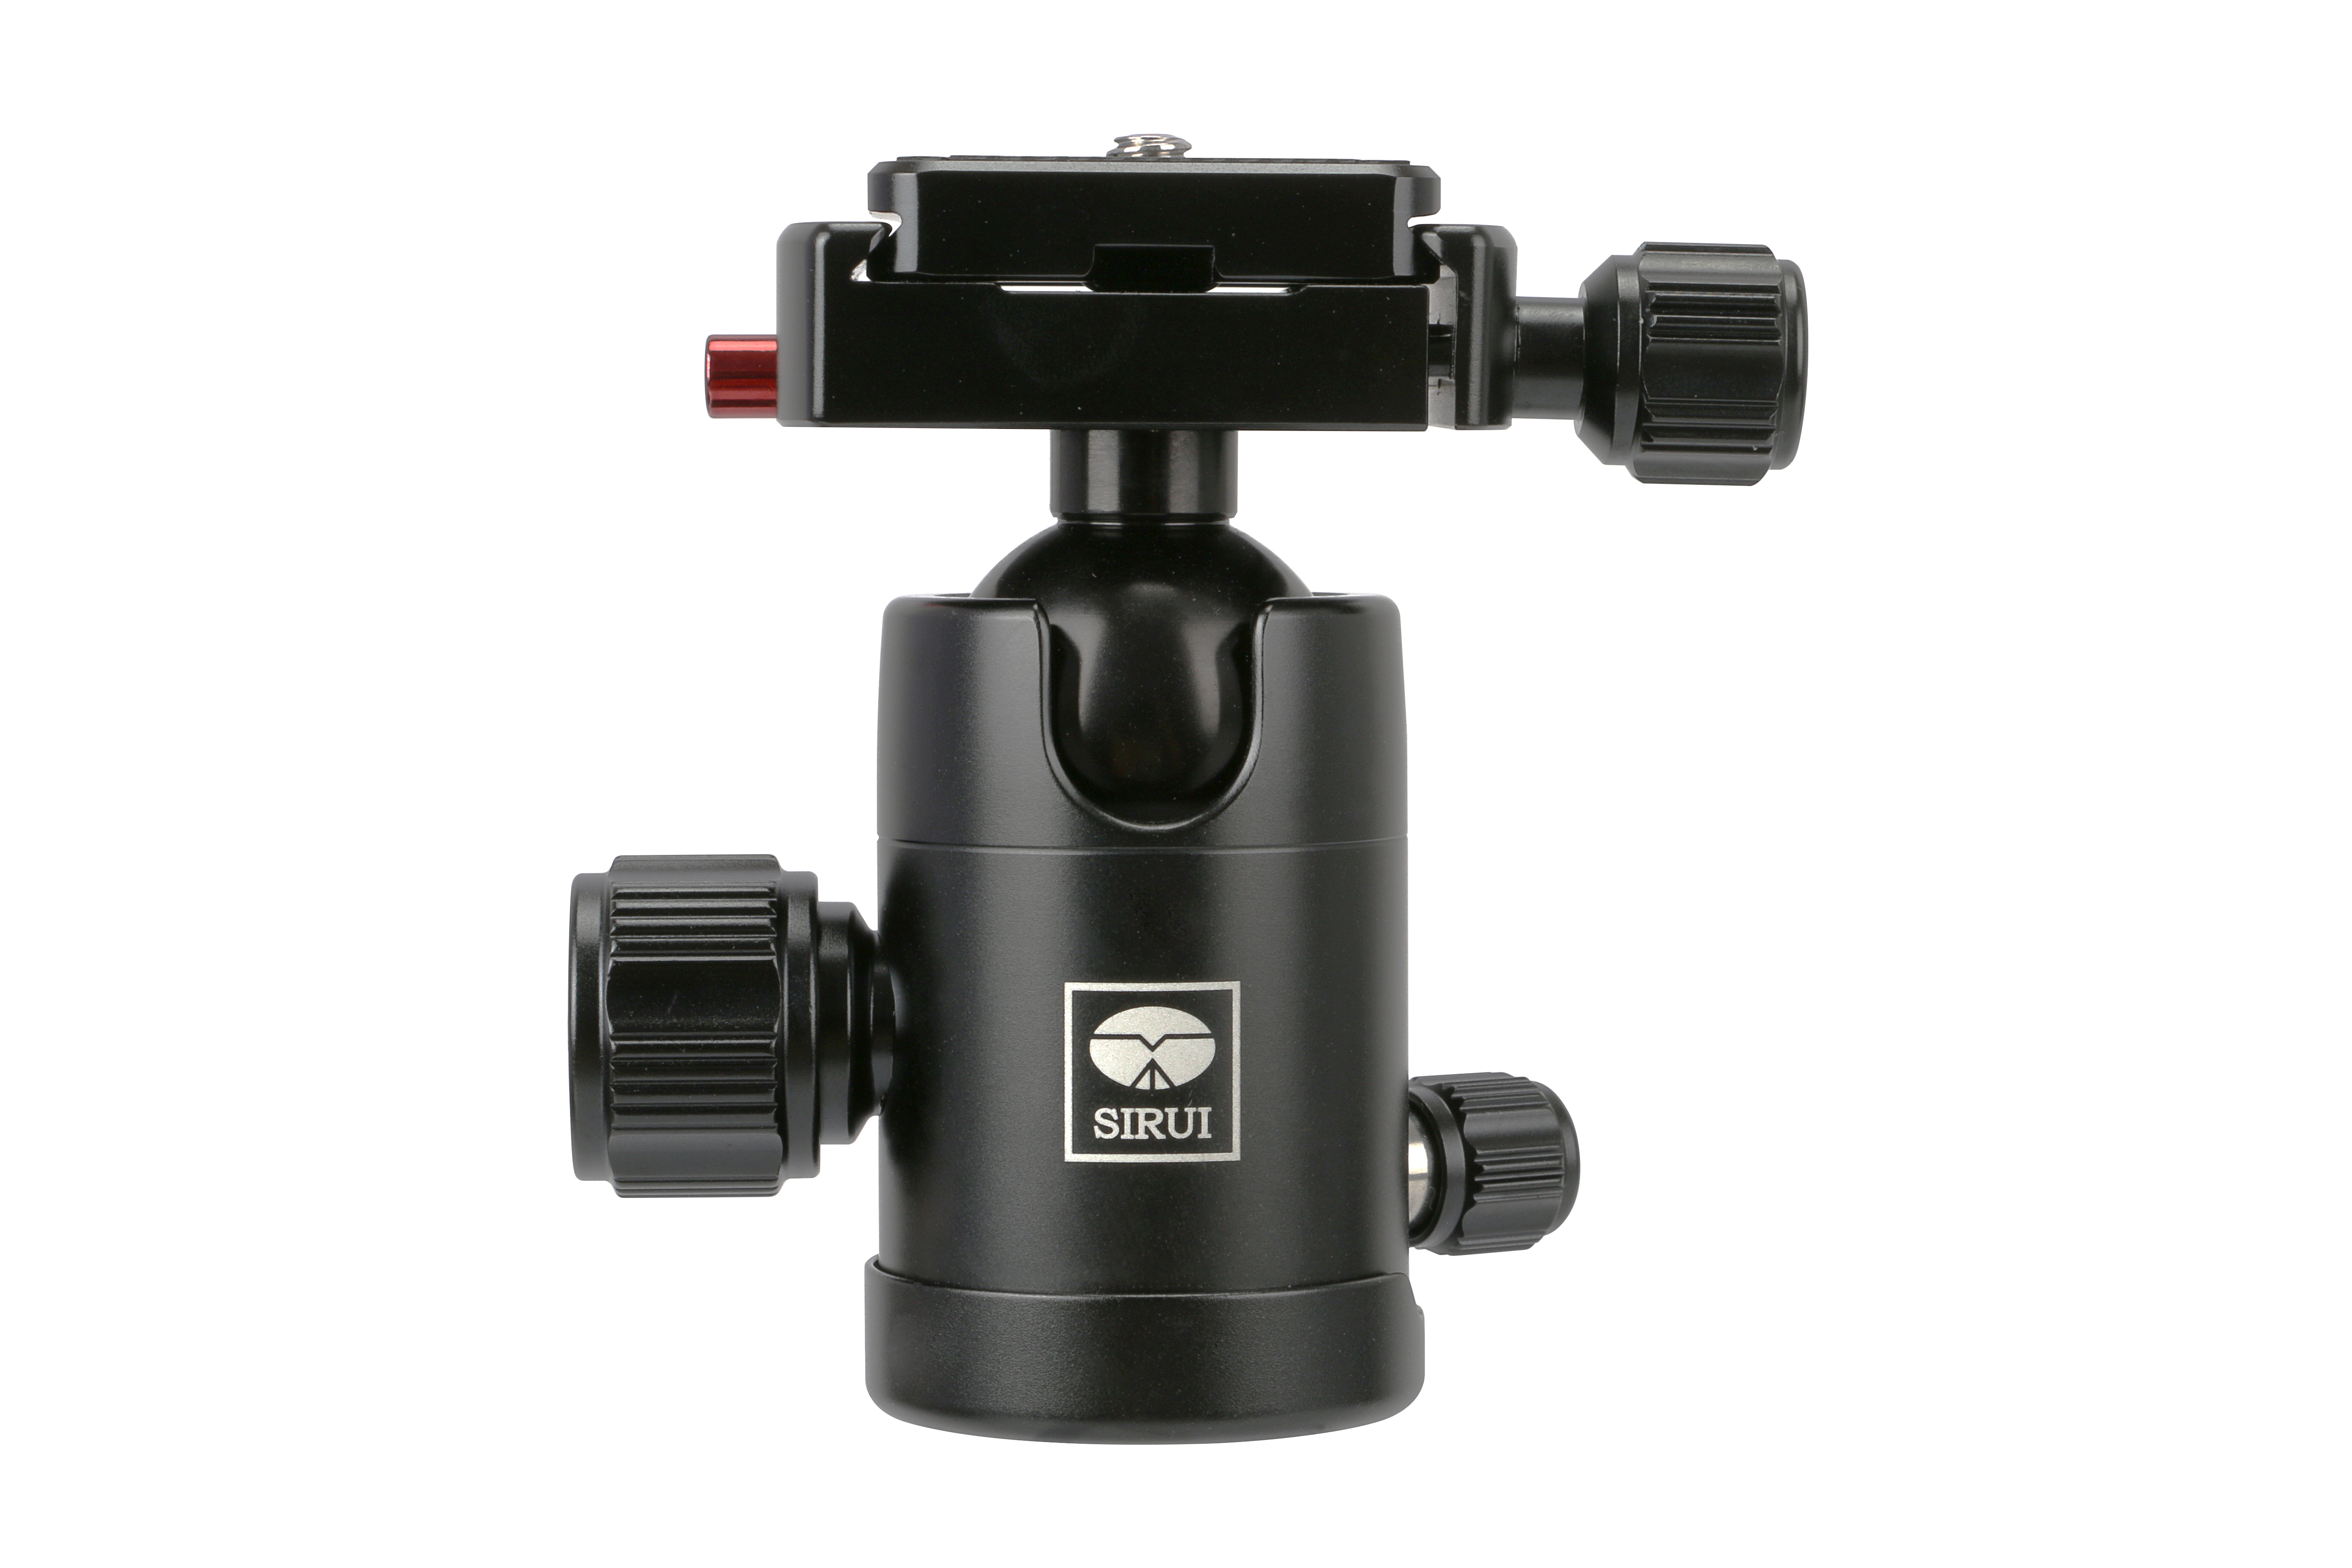 What are the different types of Sirui tripod heads?